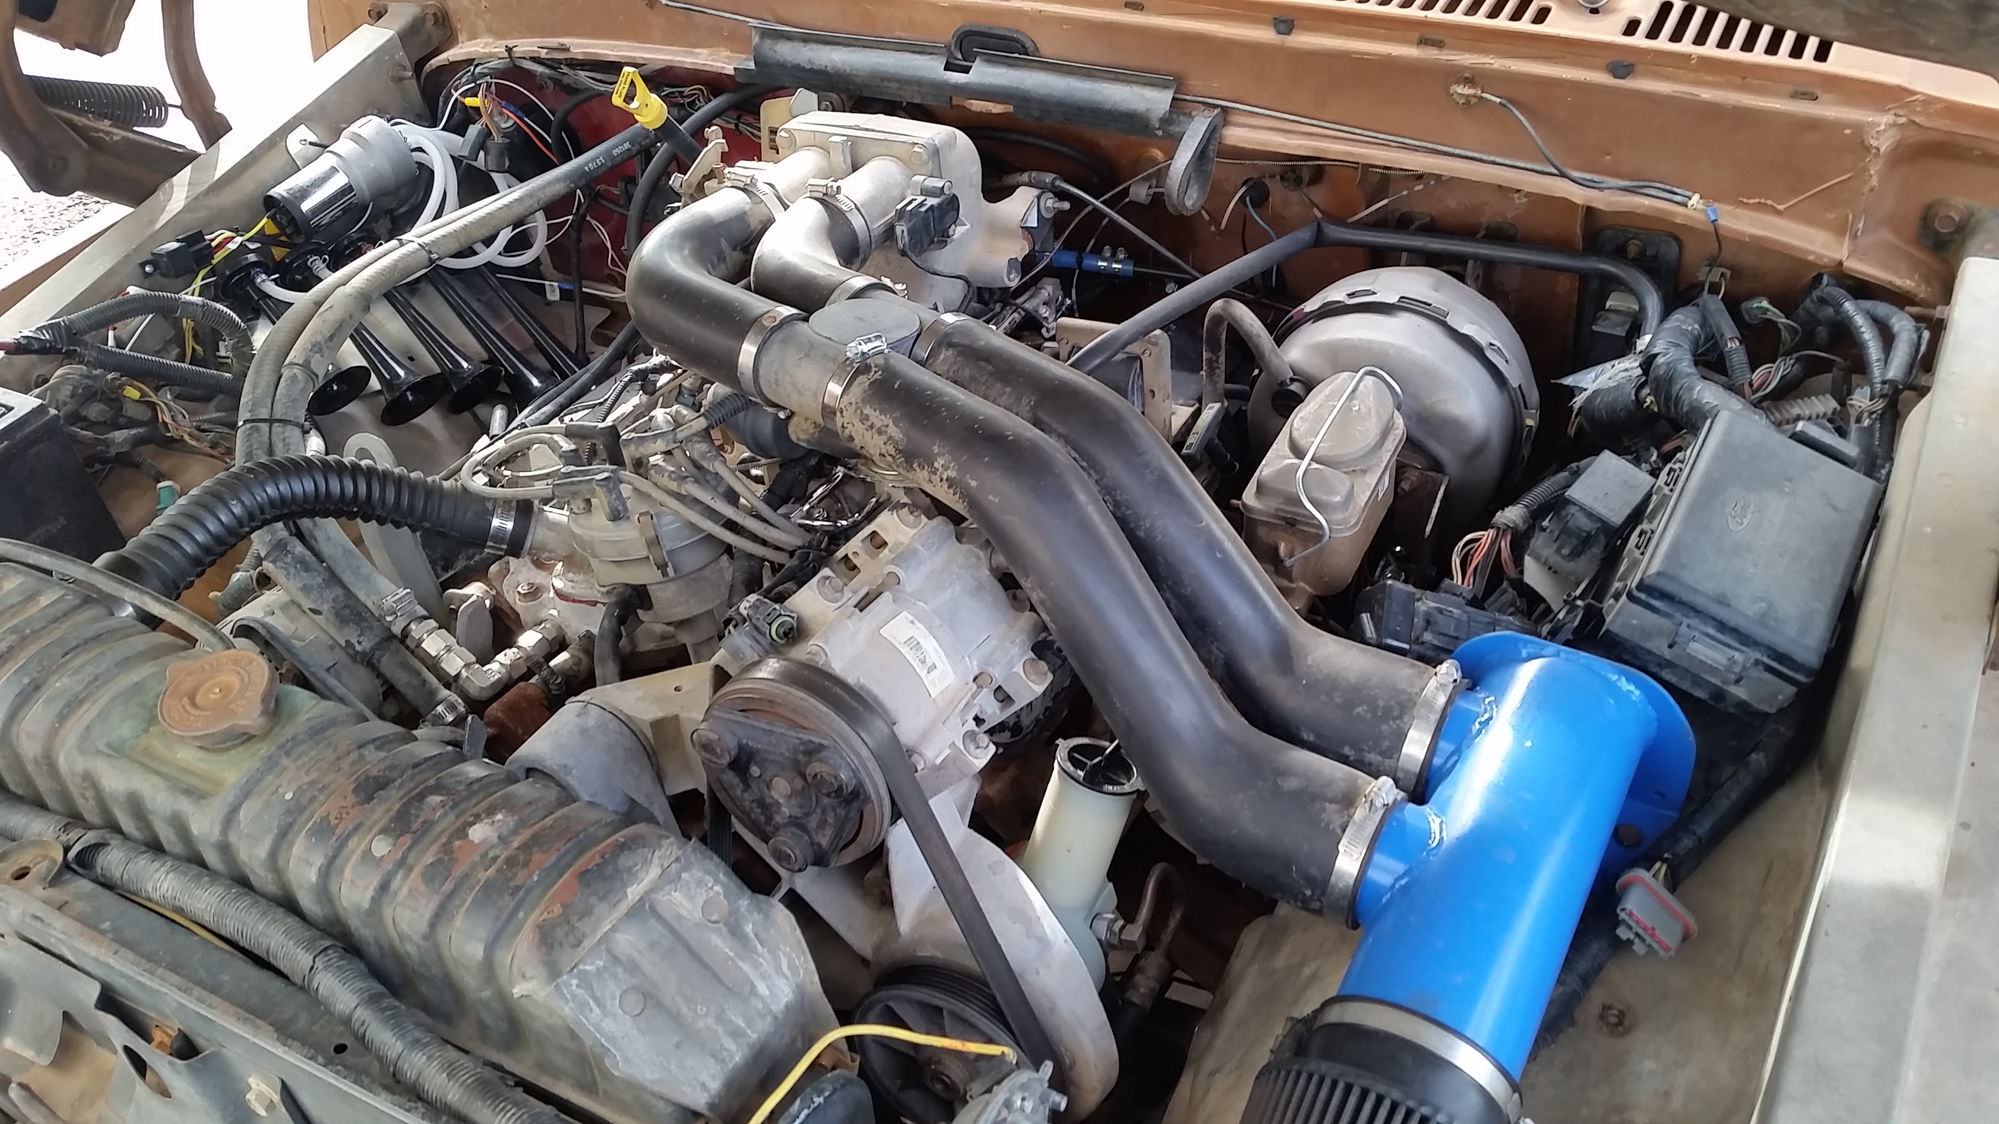 460 efi wiring help - Ford Truck Enthusiasts Forums